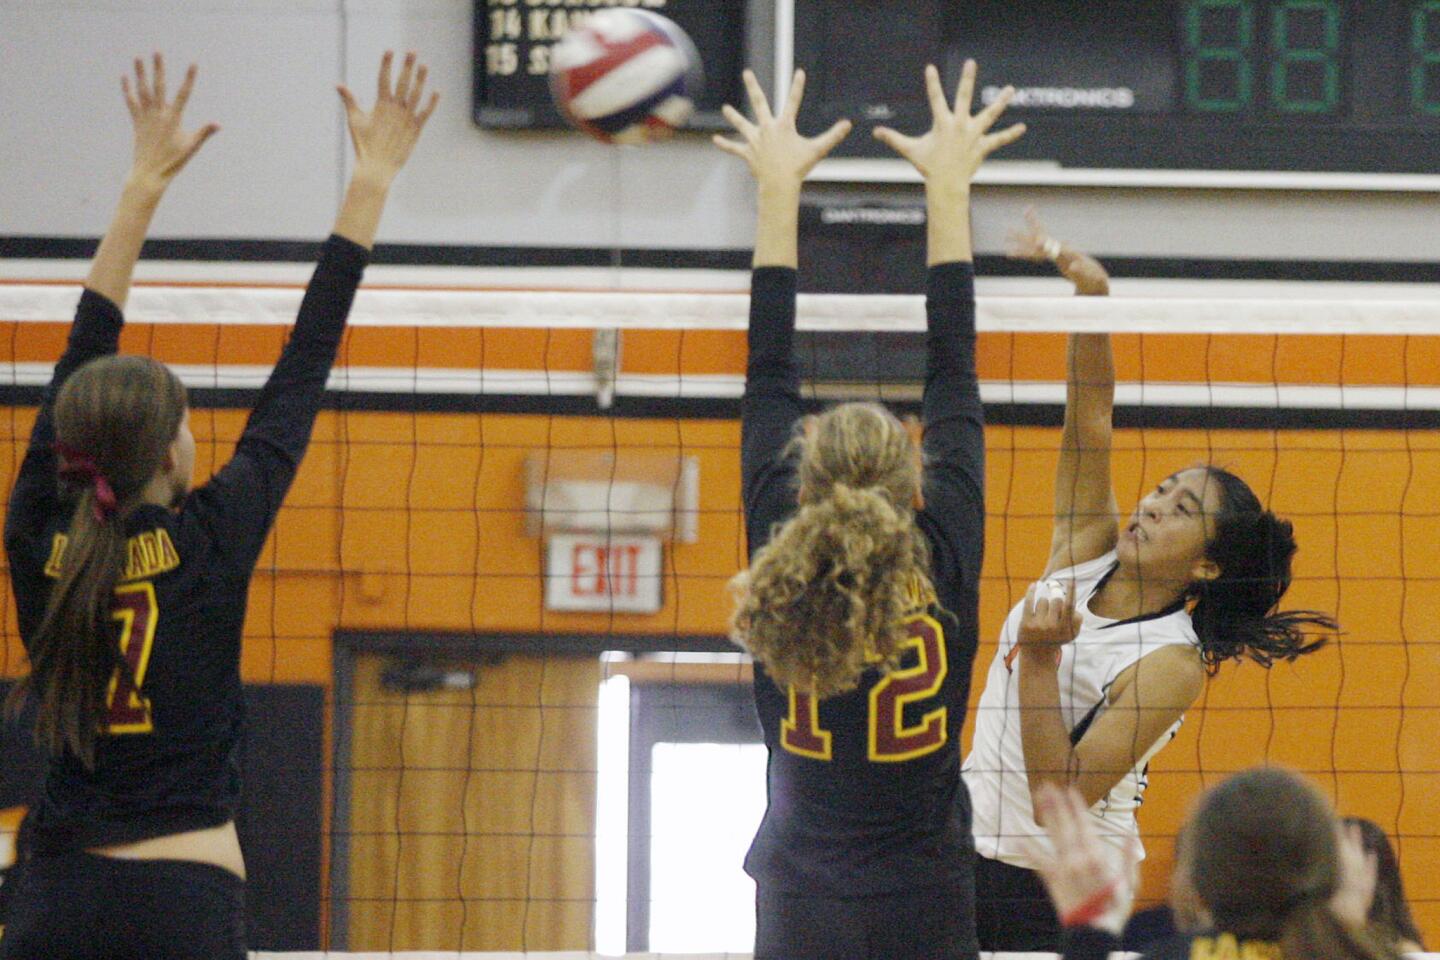 South Pasadena's Samantha Figueroa, right, spikes the ball during a game against La Canada at South Pasadena High School on Thursday, September 27, 2012.